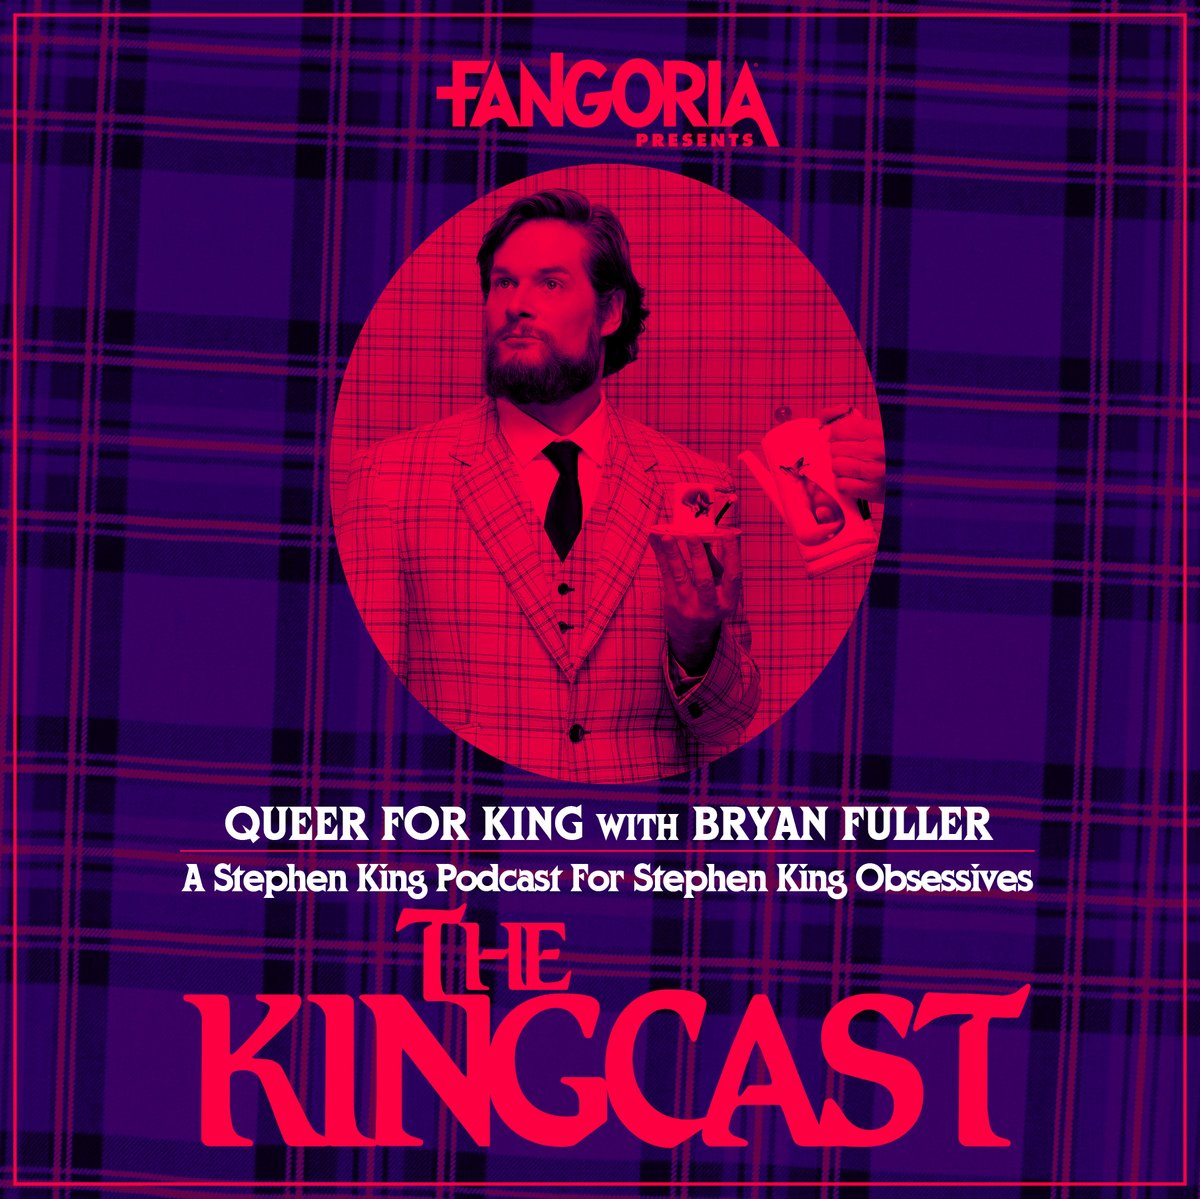 This week on THE KINGCAST, we catch up on recent horror-related events with QUEER FOR FEAR's @BryanFuller before having a sprawling discussion about queer representation in King's work! Avail everywhere now via the @FANGORIA Podcast Network! Listen: podcasts.apple.com/us/podcast/que…